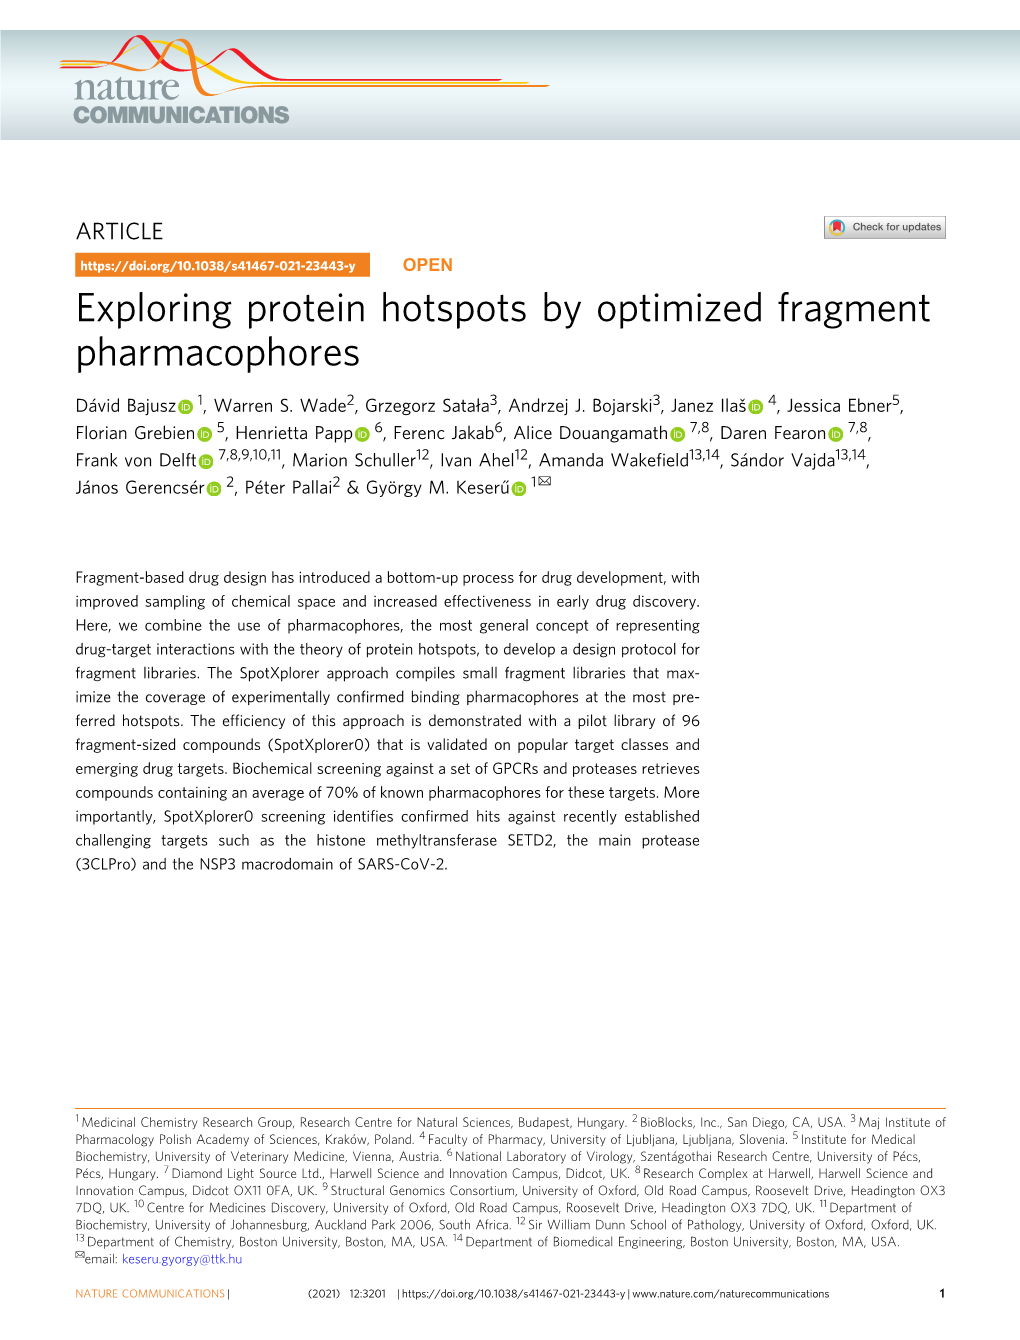 Exploring Protein Hotspots by Optimized Fragment Pharmacophores